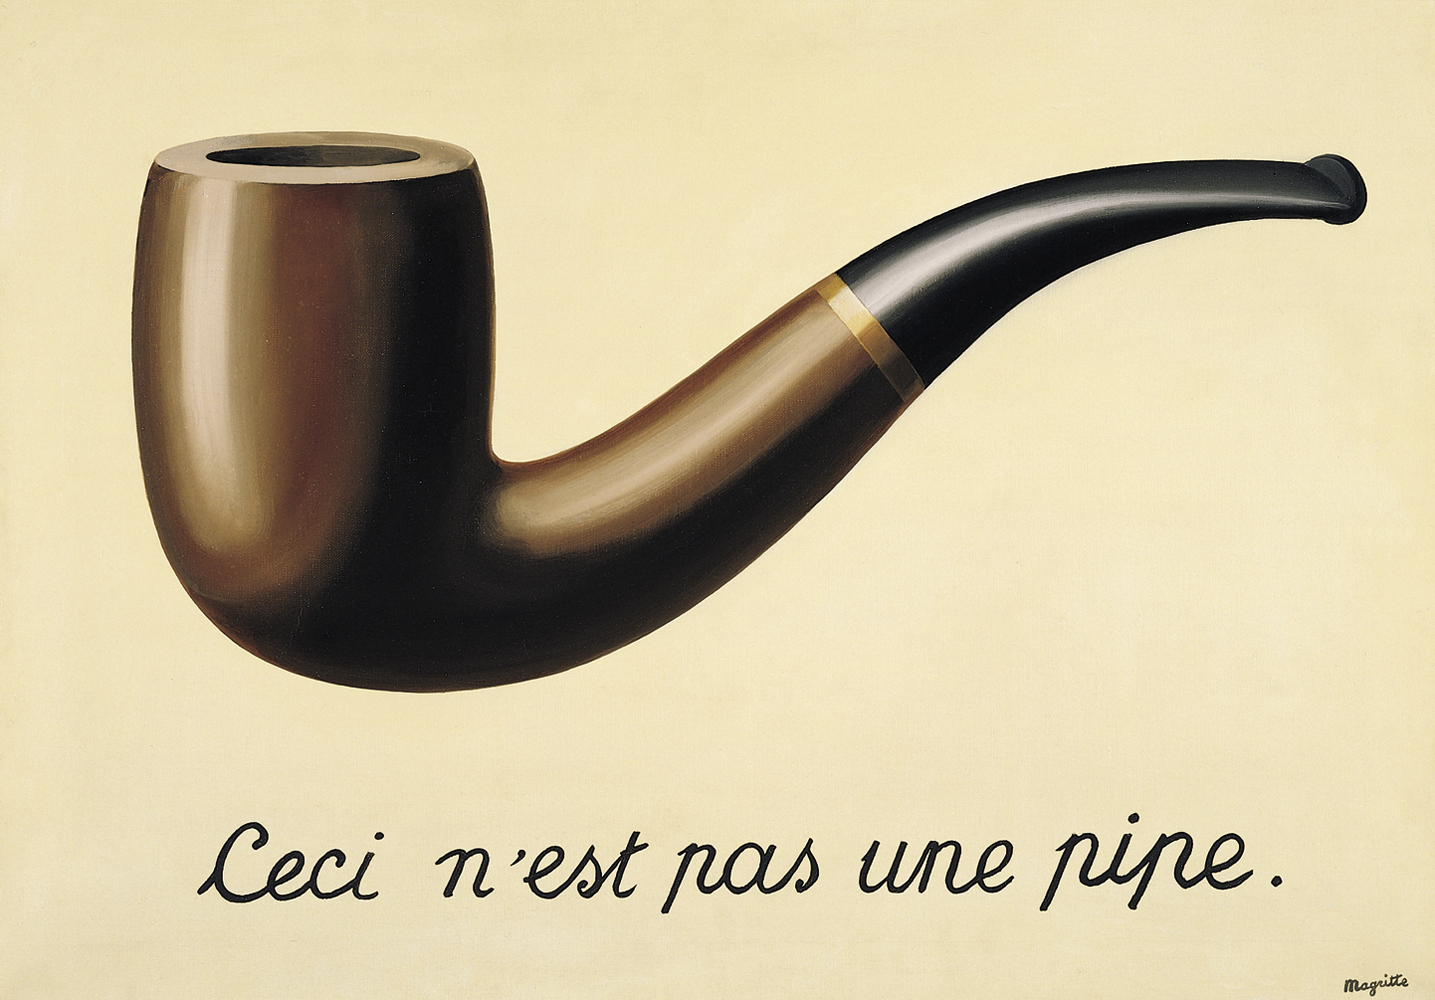 Magritte's “The Treachery of Images” (1928) is a commentary on how people have been struggling to recognize when an object does not physically align with its representation for far longer than the iPhone.